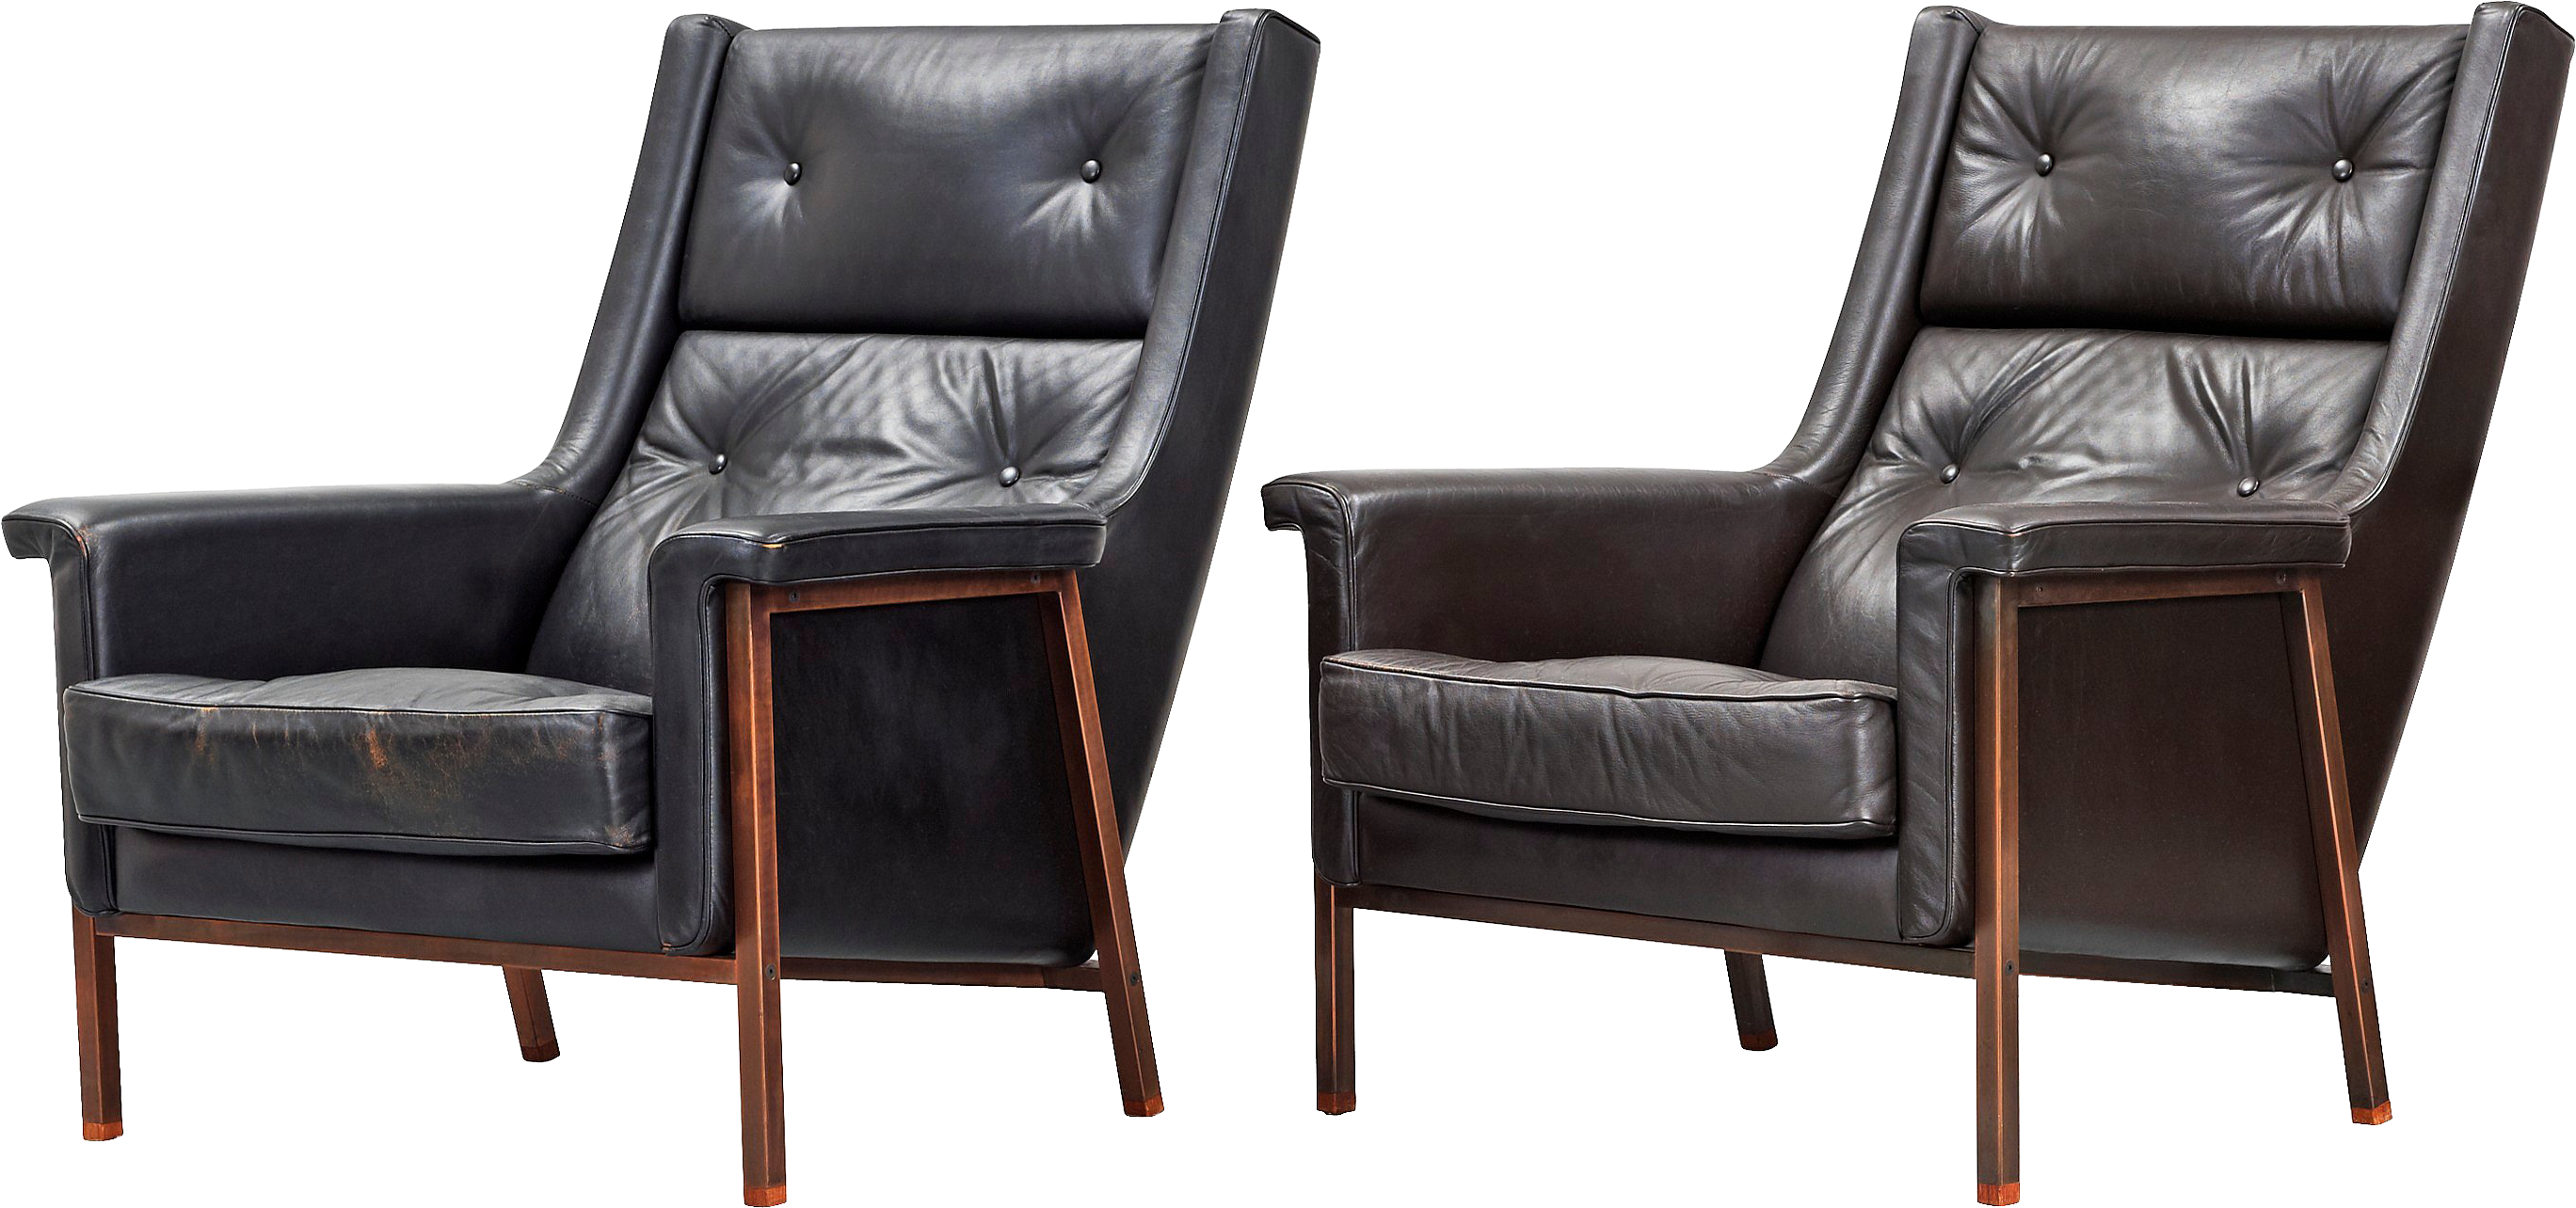 Black armchairs PNG image